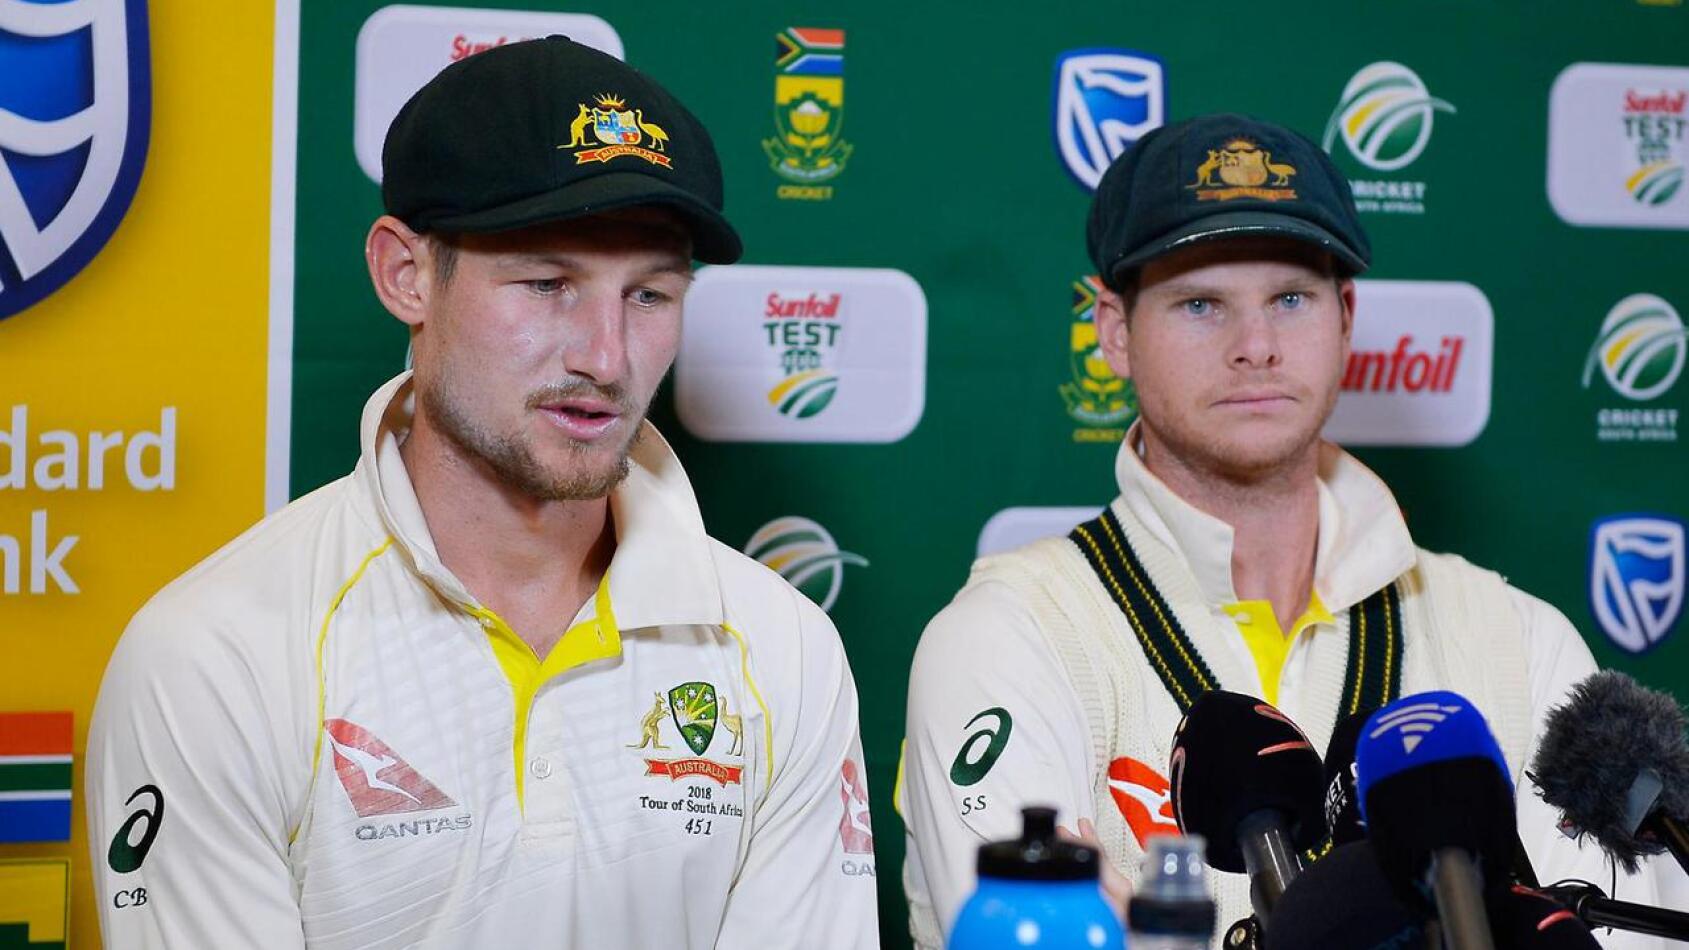 Cameron Bancroft and Steve Smith front up to the media after the Sandpapergate controversy blew up at Newlands in 2018.